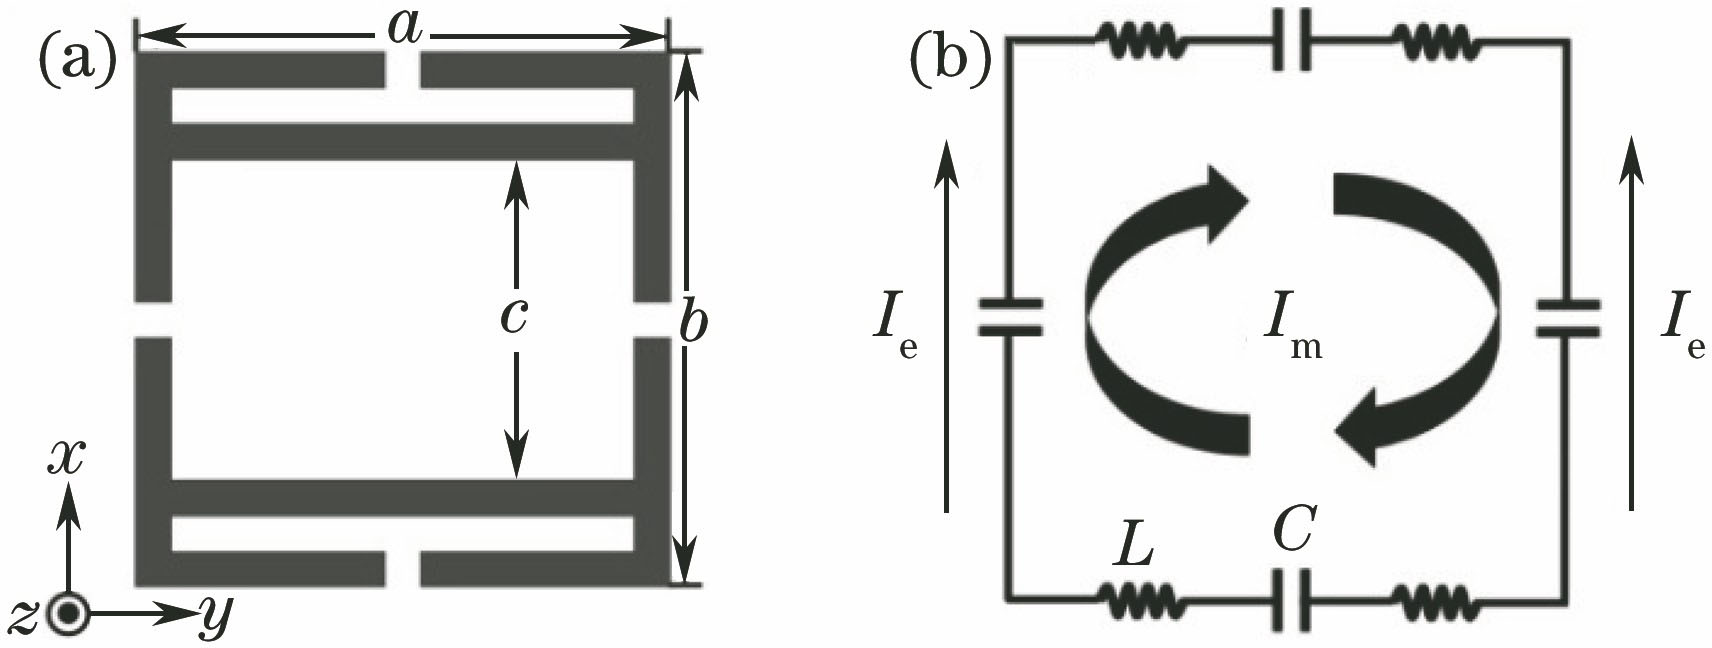 (a) Unit model; (b) equivalent circuit of outer loop